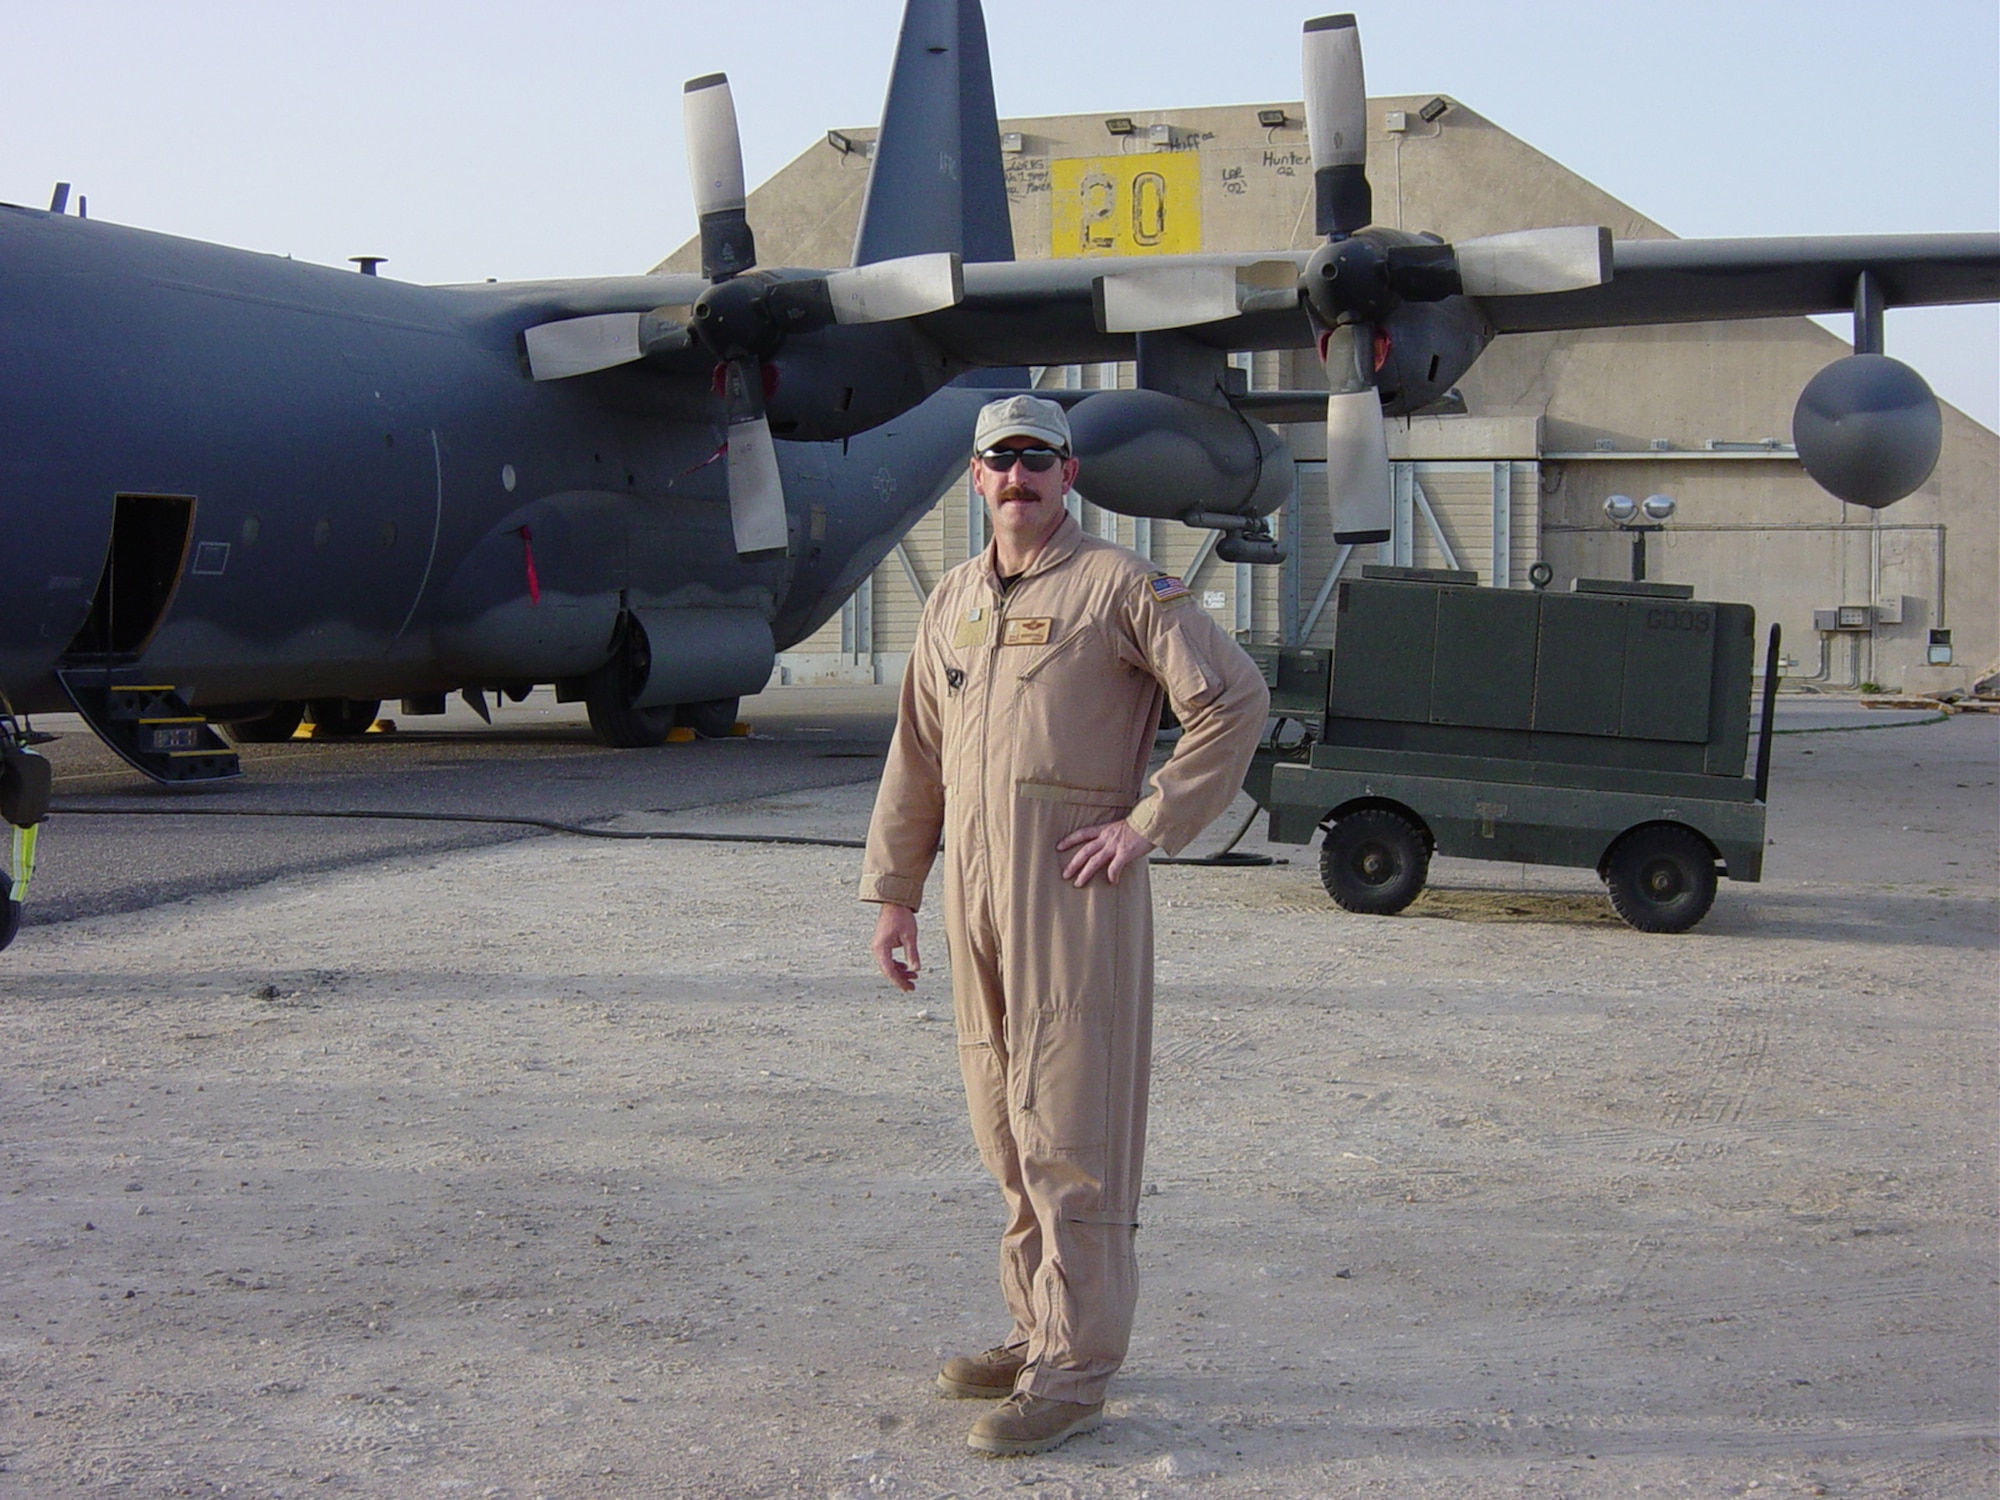 Senior Master Sgt. Dale P. Berryhill poses next to an aircraft while deployed to Iraq. (U.S. Air Force file photo)                           